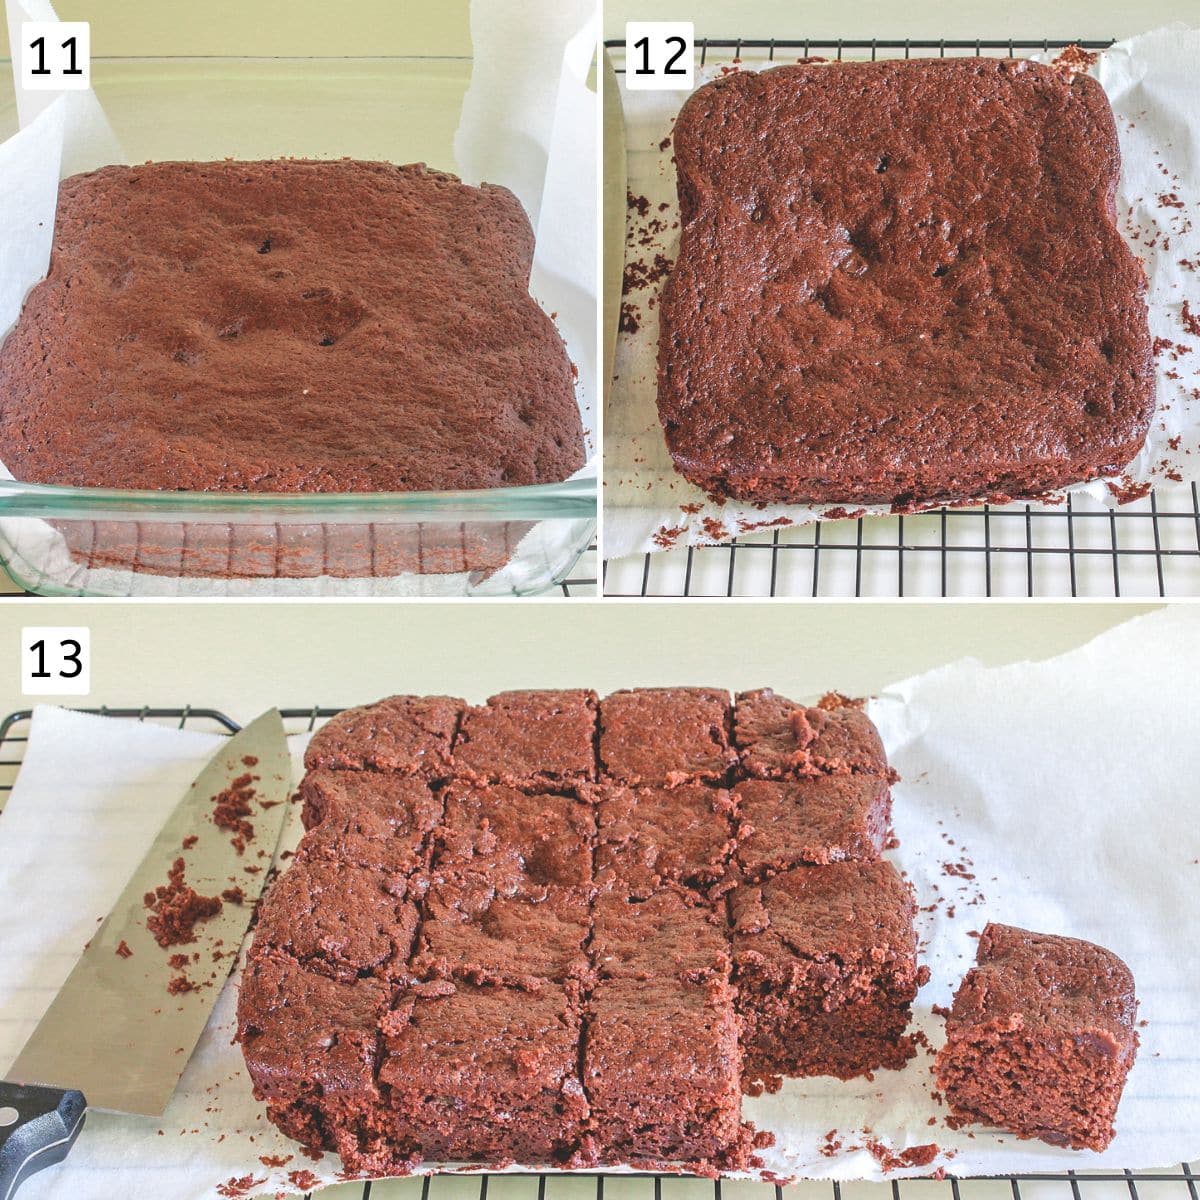 Collage of 3 images showing baked eggless brownie in a pan, on a cooling rack and cut into pieces.